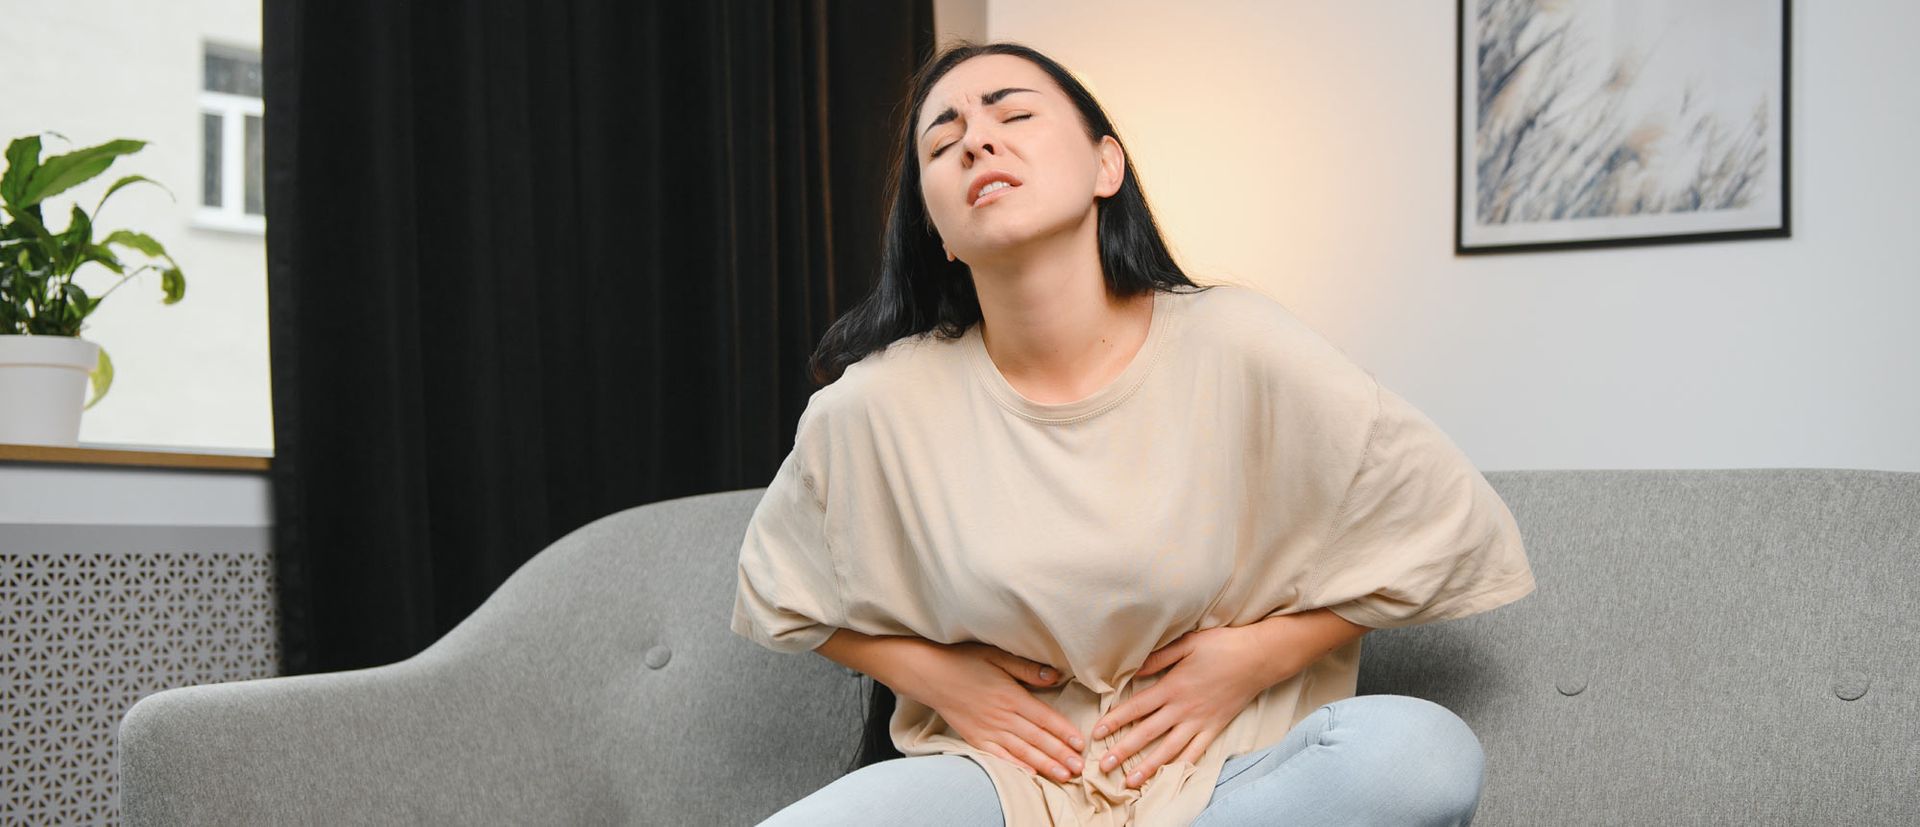 Learn About Healing IBS Naturally A Case Study by Dr. Alicia Armitstead by Reading This Case Study